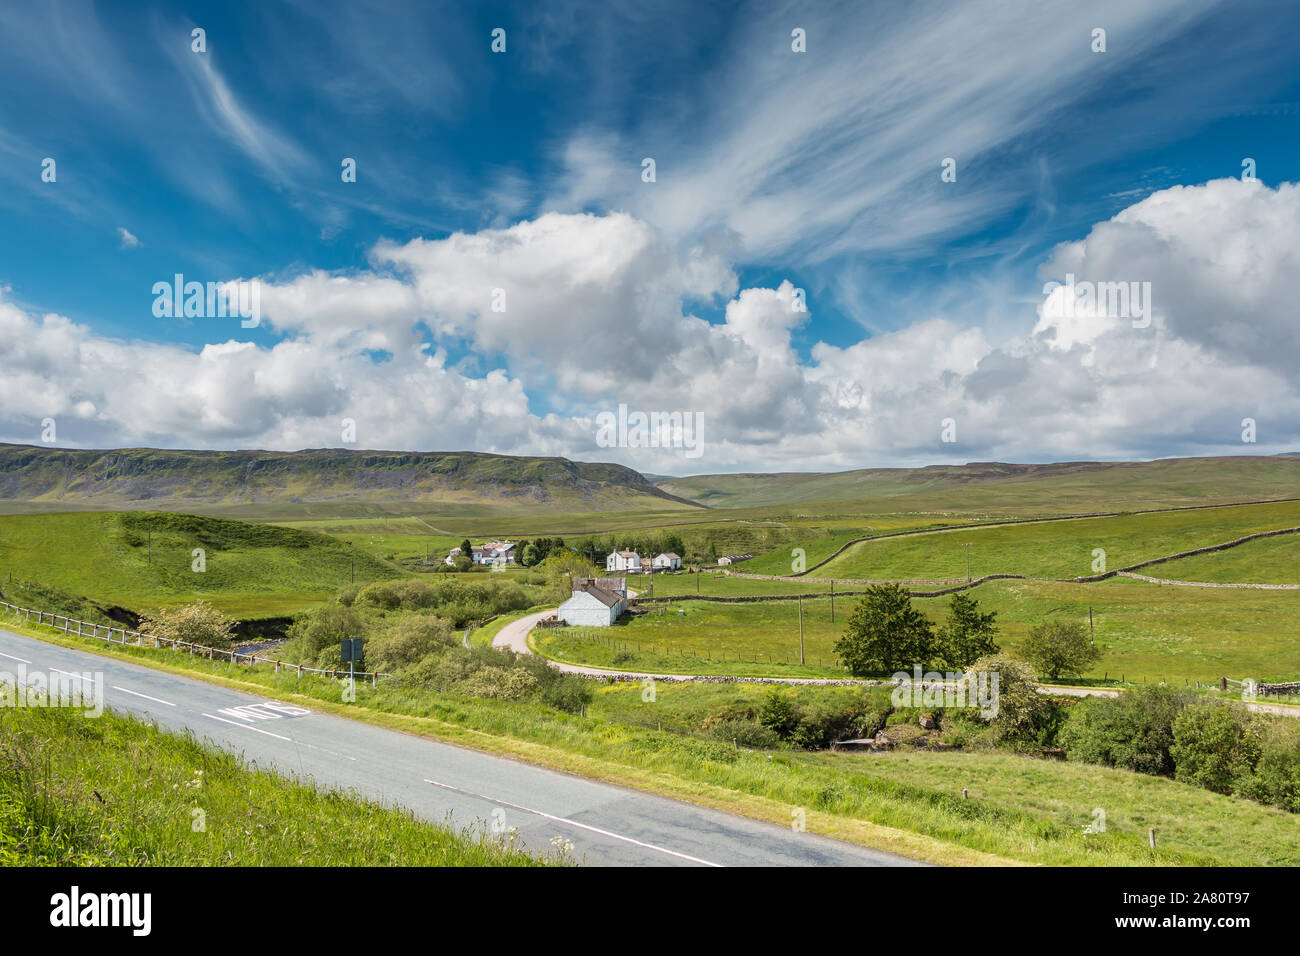 Morgen Sommer am Langdon Beck, Obere Teesdale Stockfoto